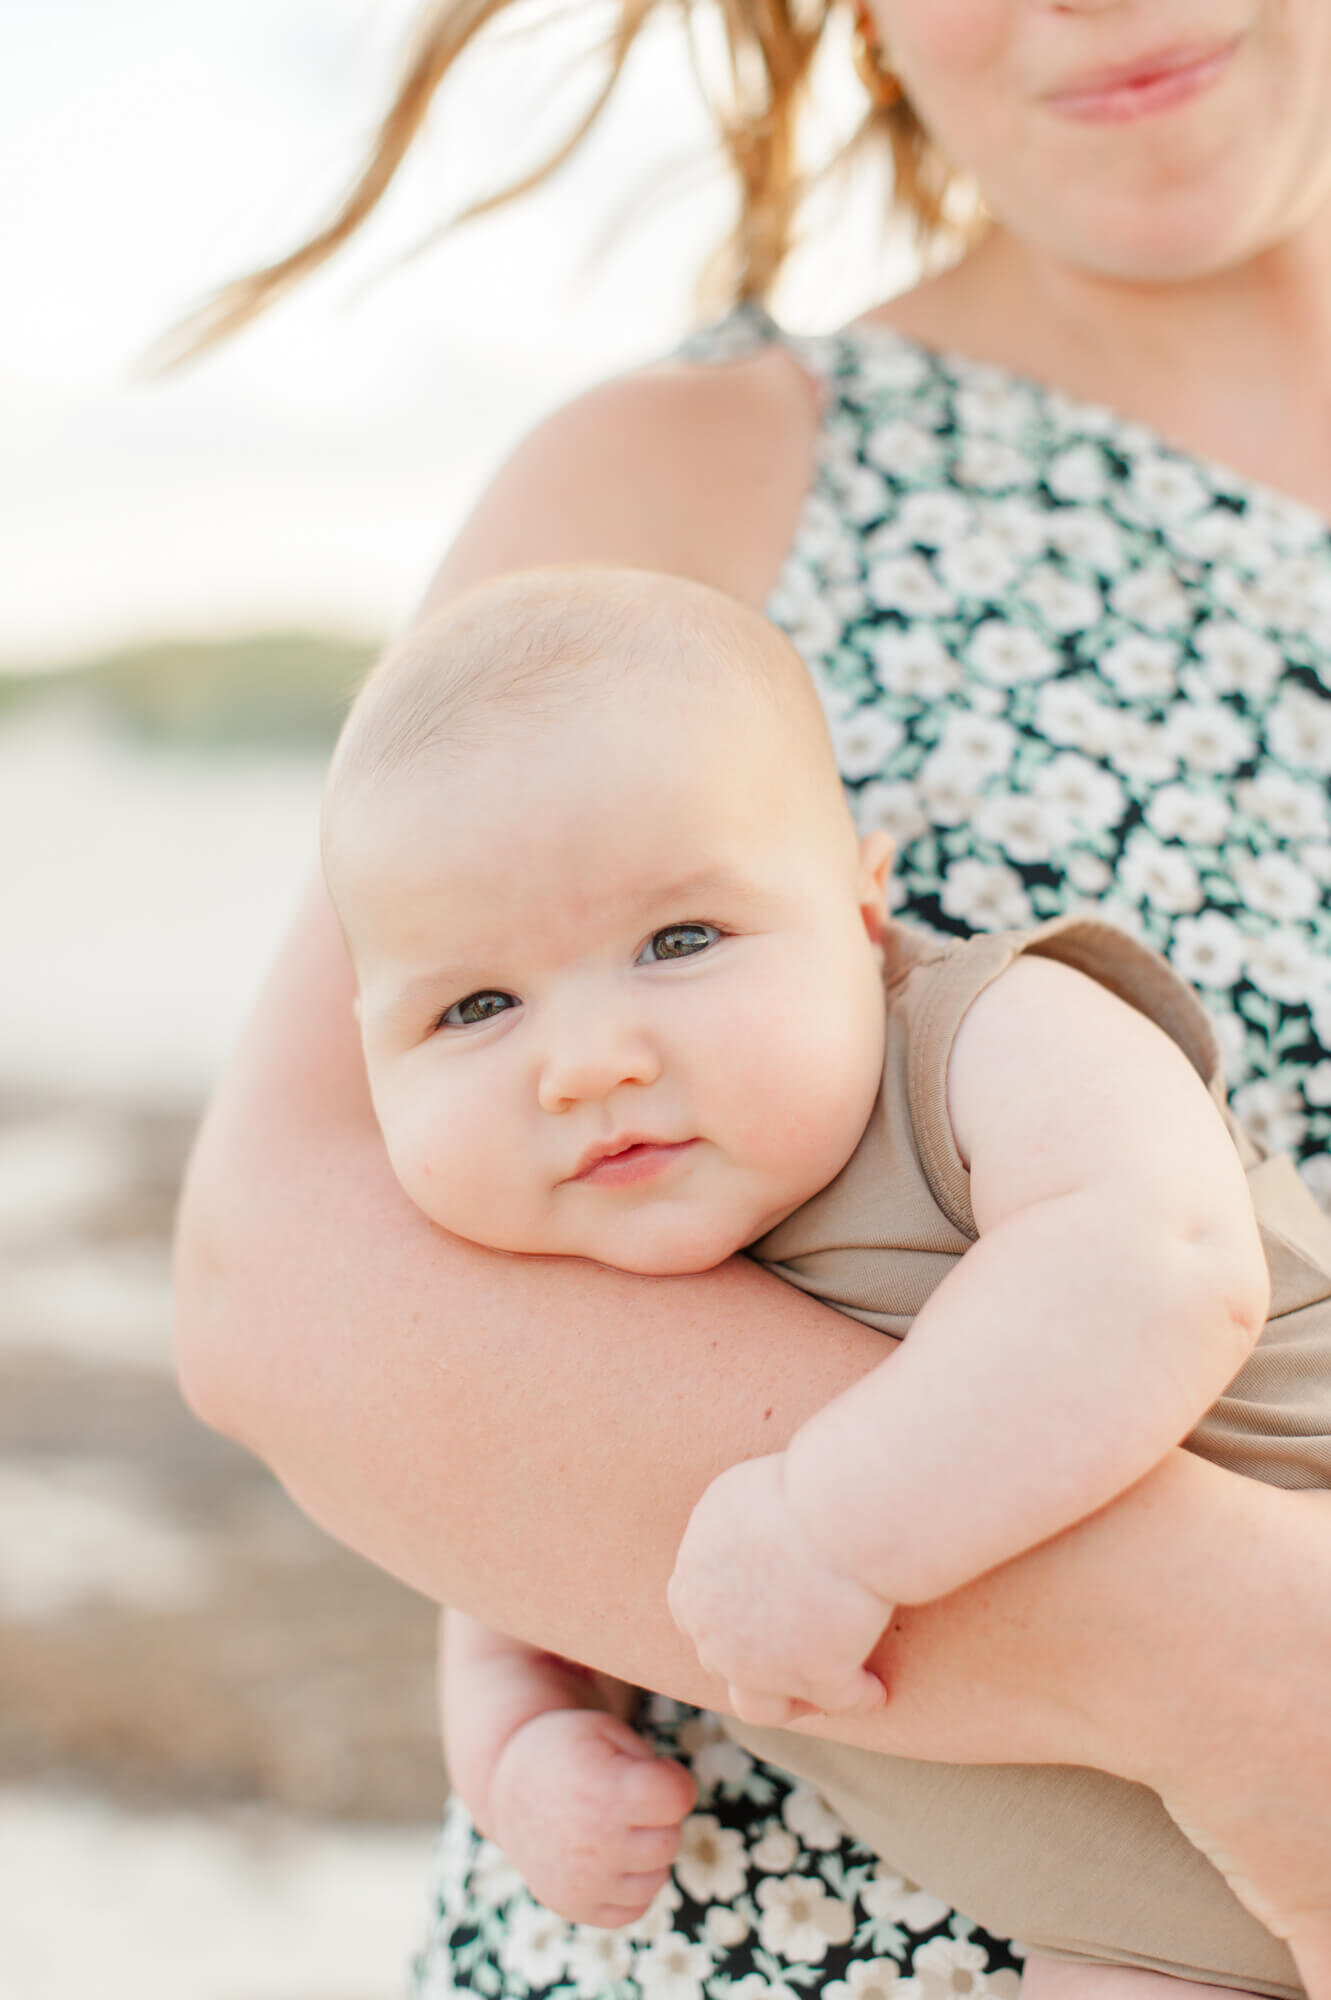 Closeup image of mom holding young infant boy with chunky cheeks